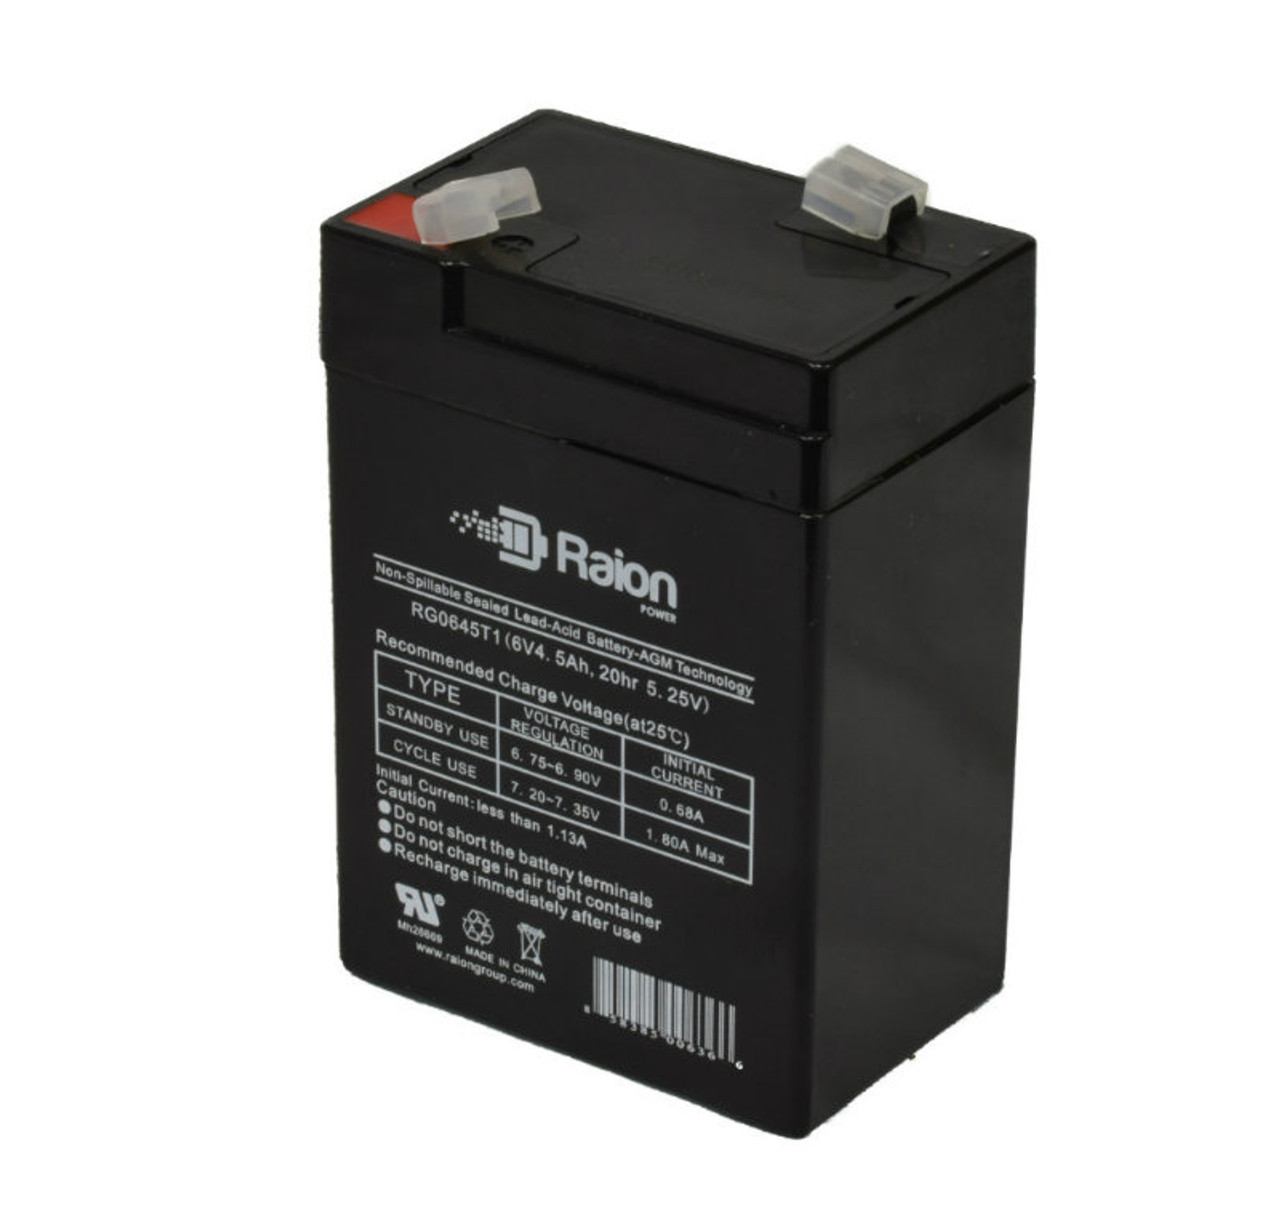 Raion Power RG0645T1 6V 4.5Ah Replacement Battery Cartridge for Dual-Lite WEP